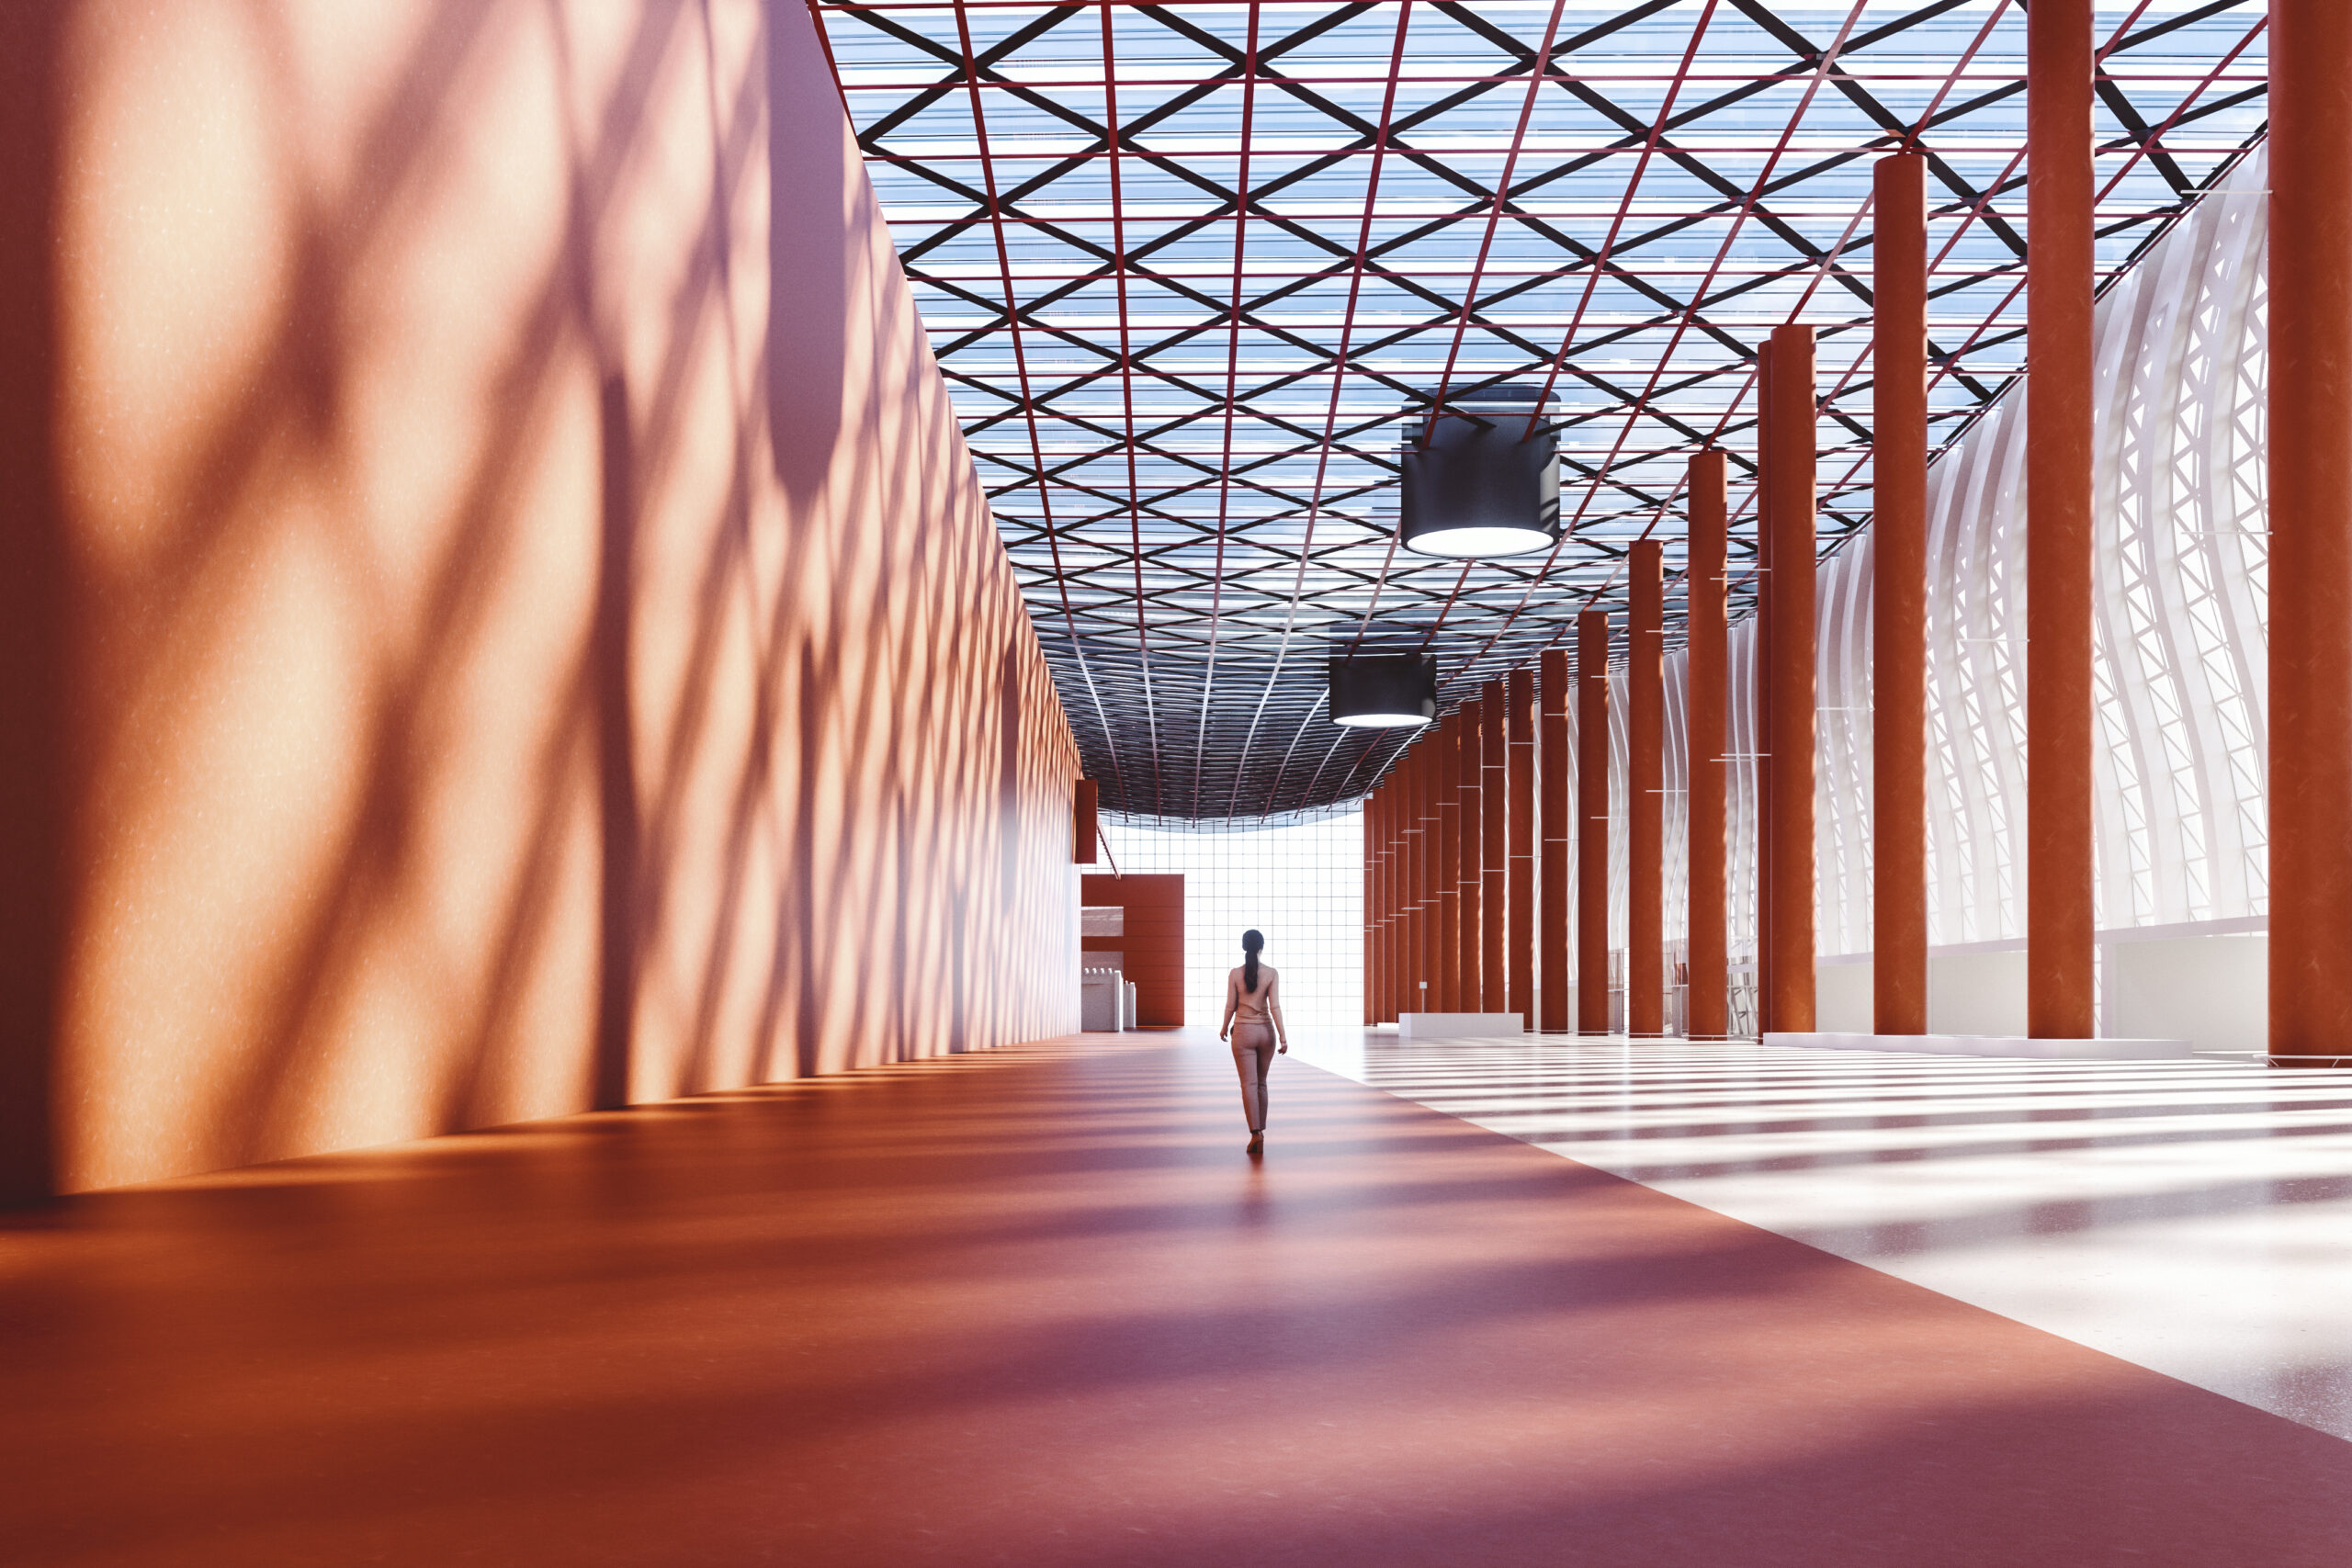 An artistic shot of a woman walking through an orange mezzanine area with long shadows on the wall.